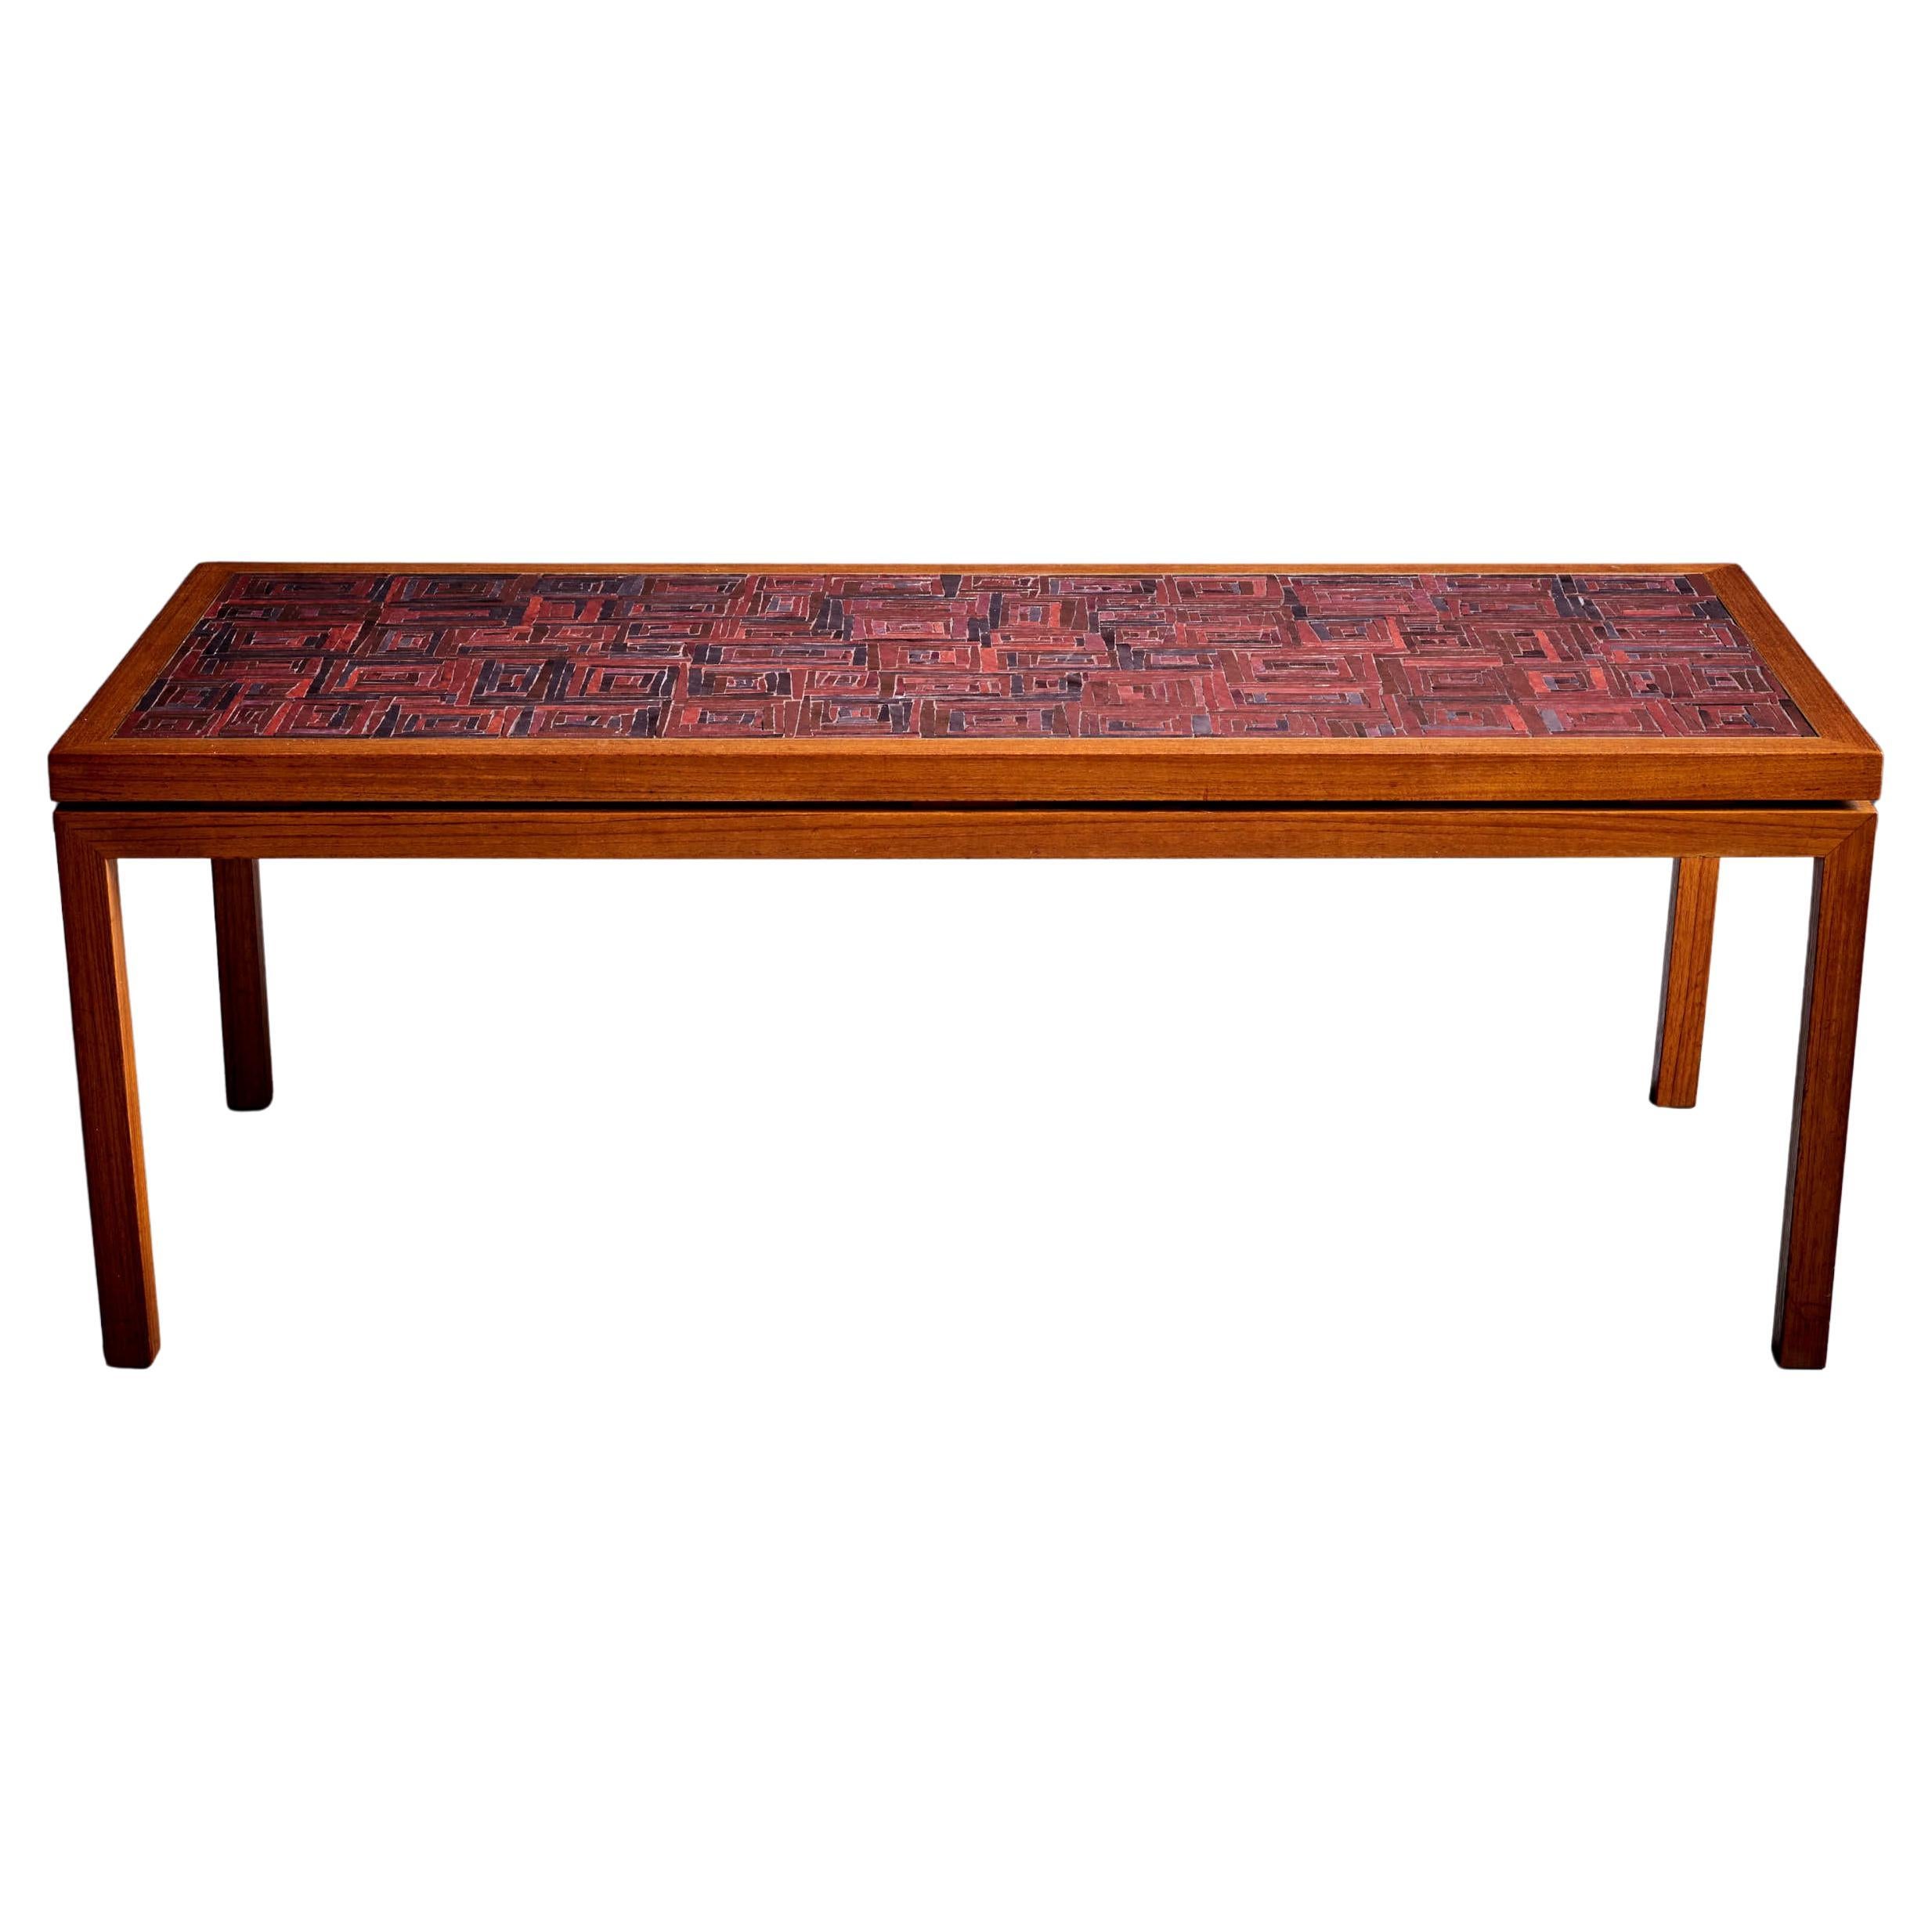 Very Fine high quality solid teak and brass inlay framed German Mosaik Coffee table.  Incredible richness to the mosaik. 